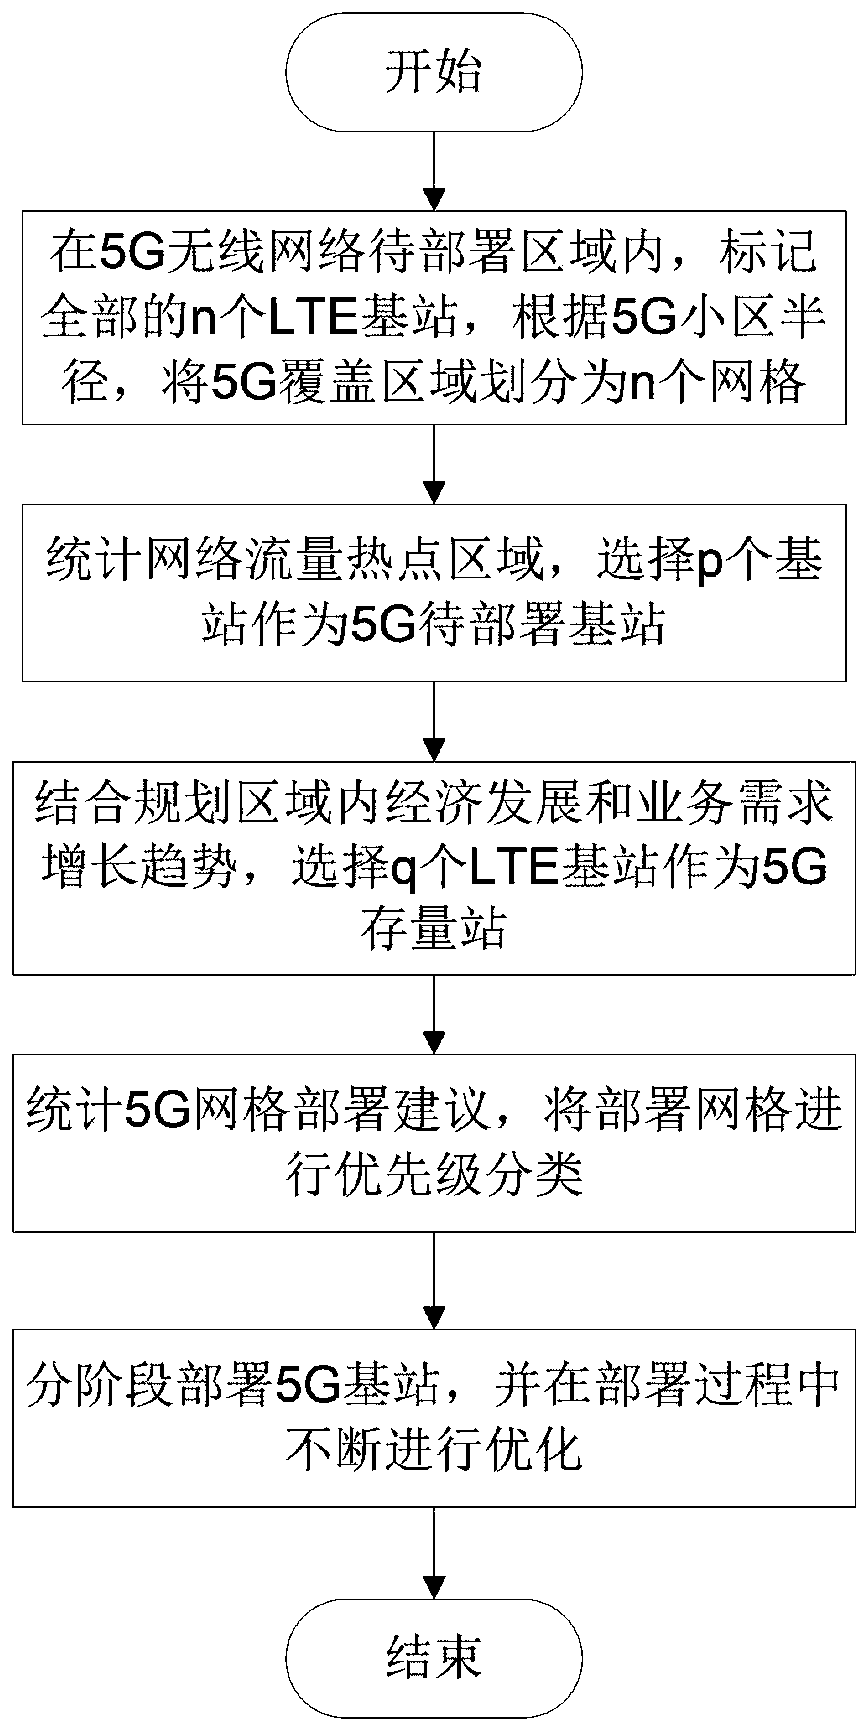 Wireless network deployment method for 5G NSA networking mode